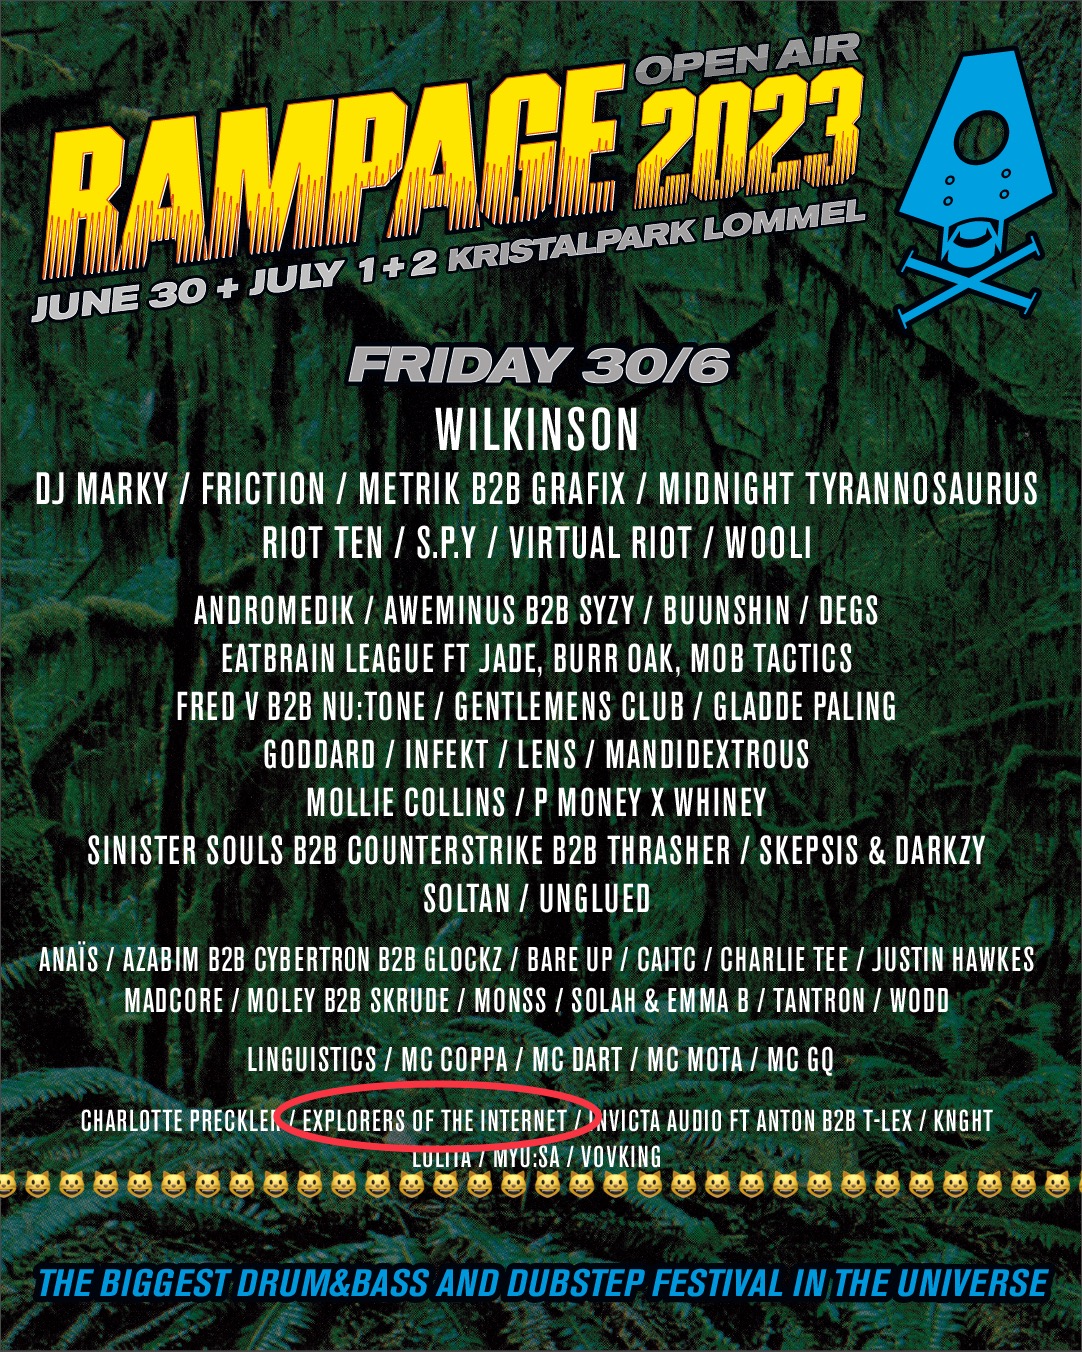 Explorers of the Internet at Rampage Open Air in Lommel